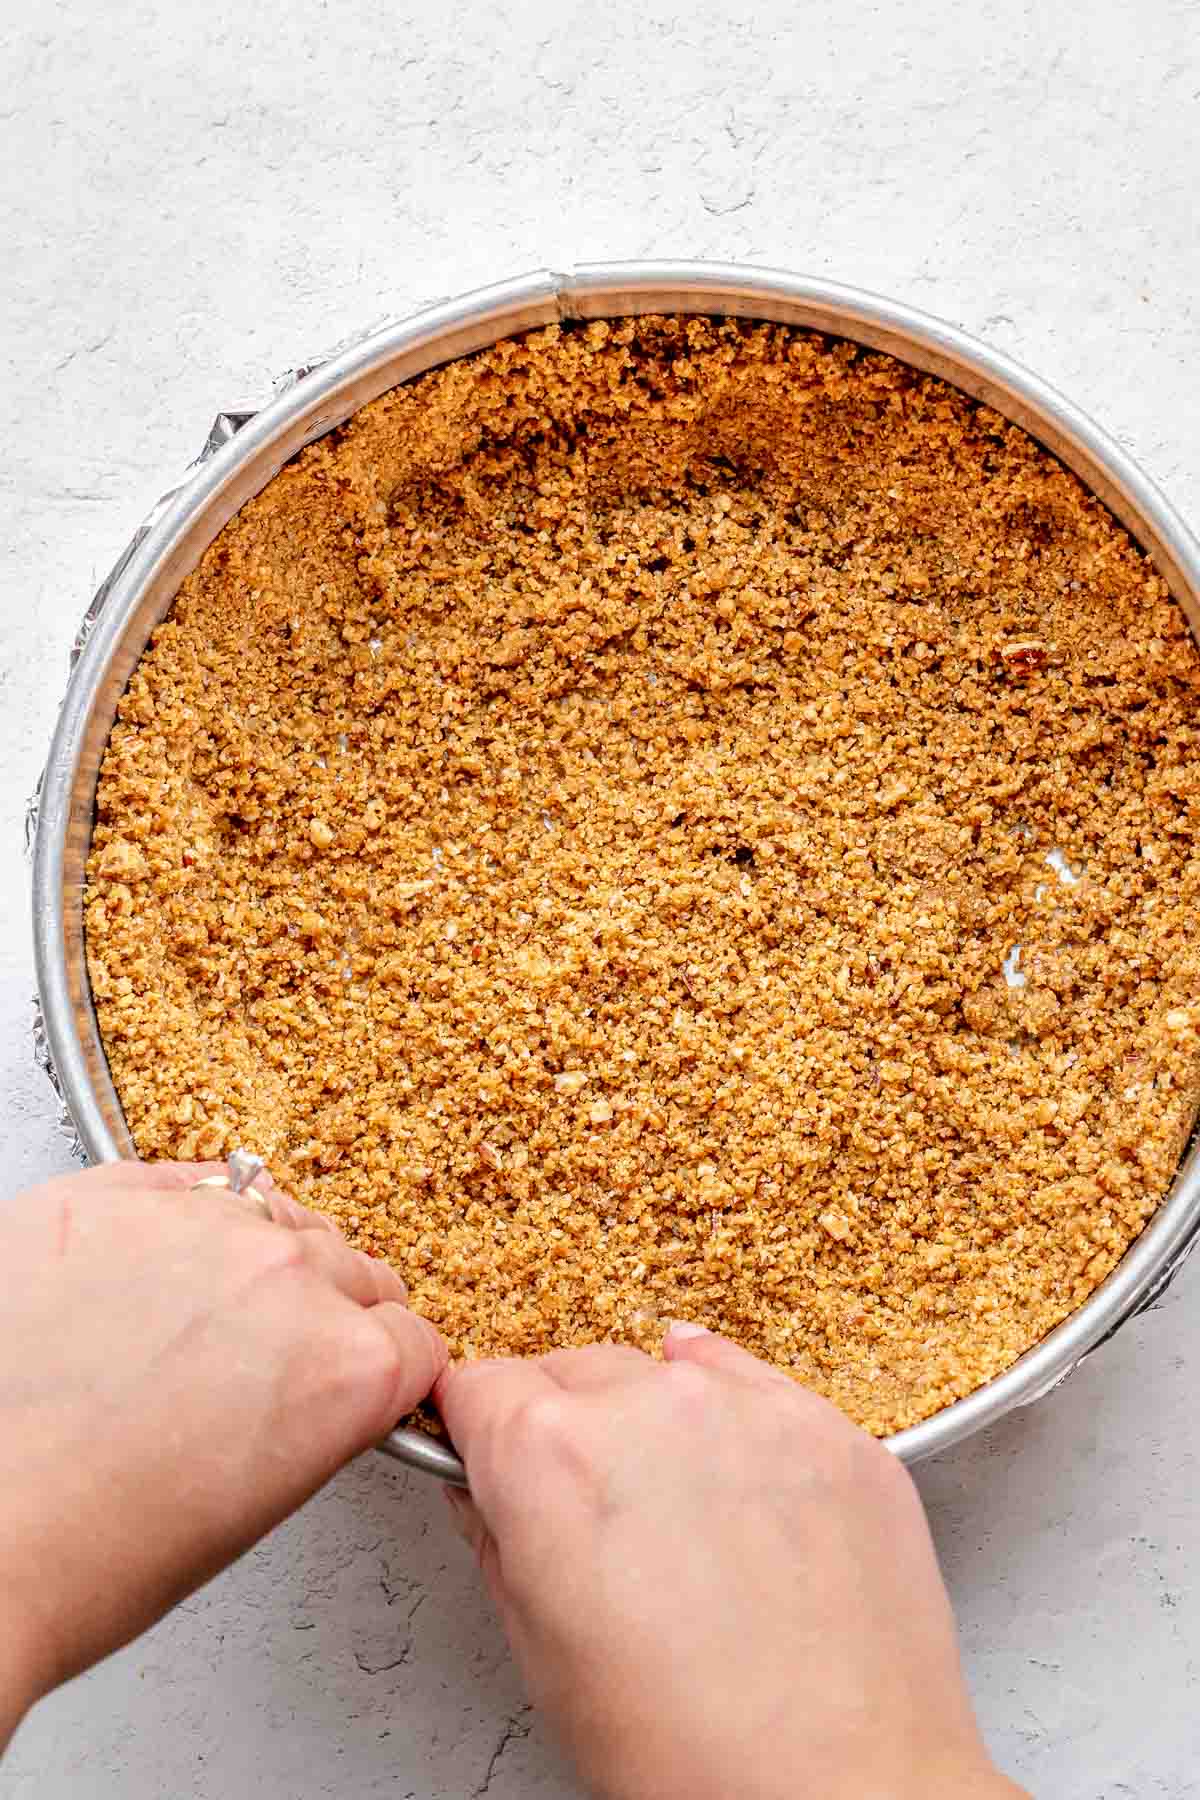 Turtle Cheesecake crust being pressed into pan